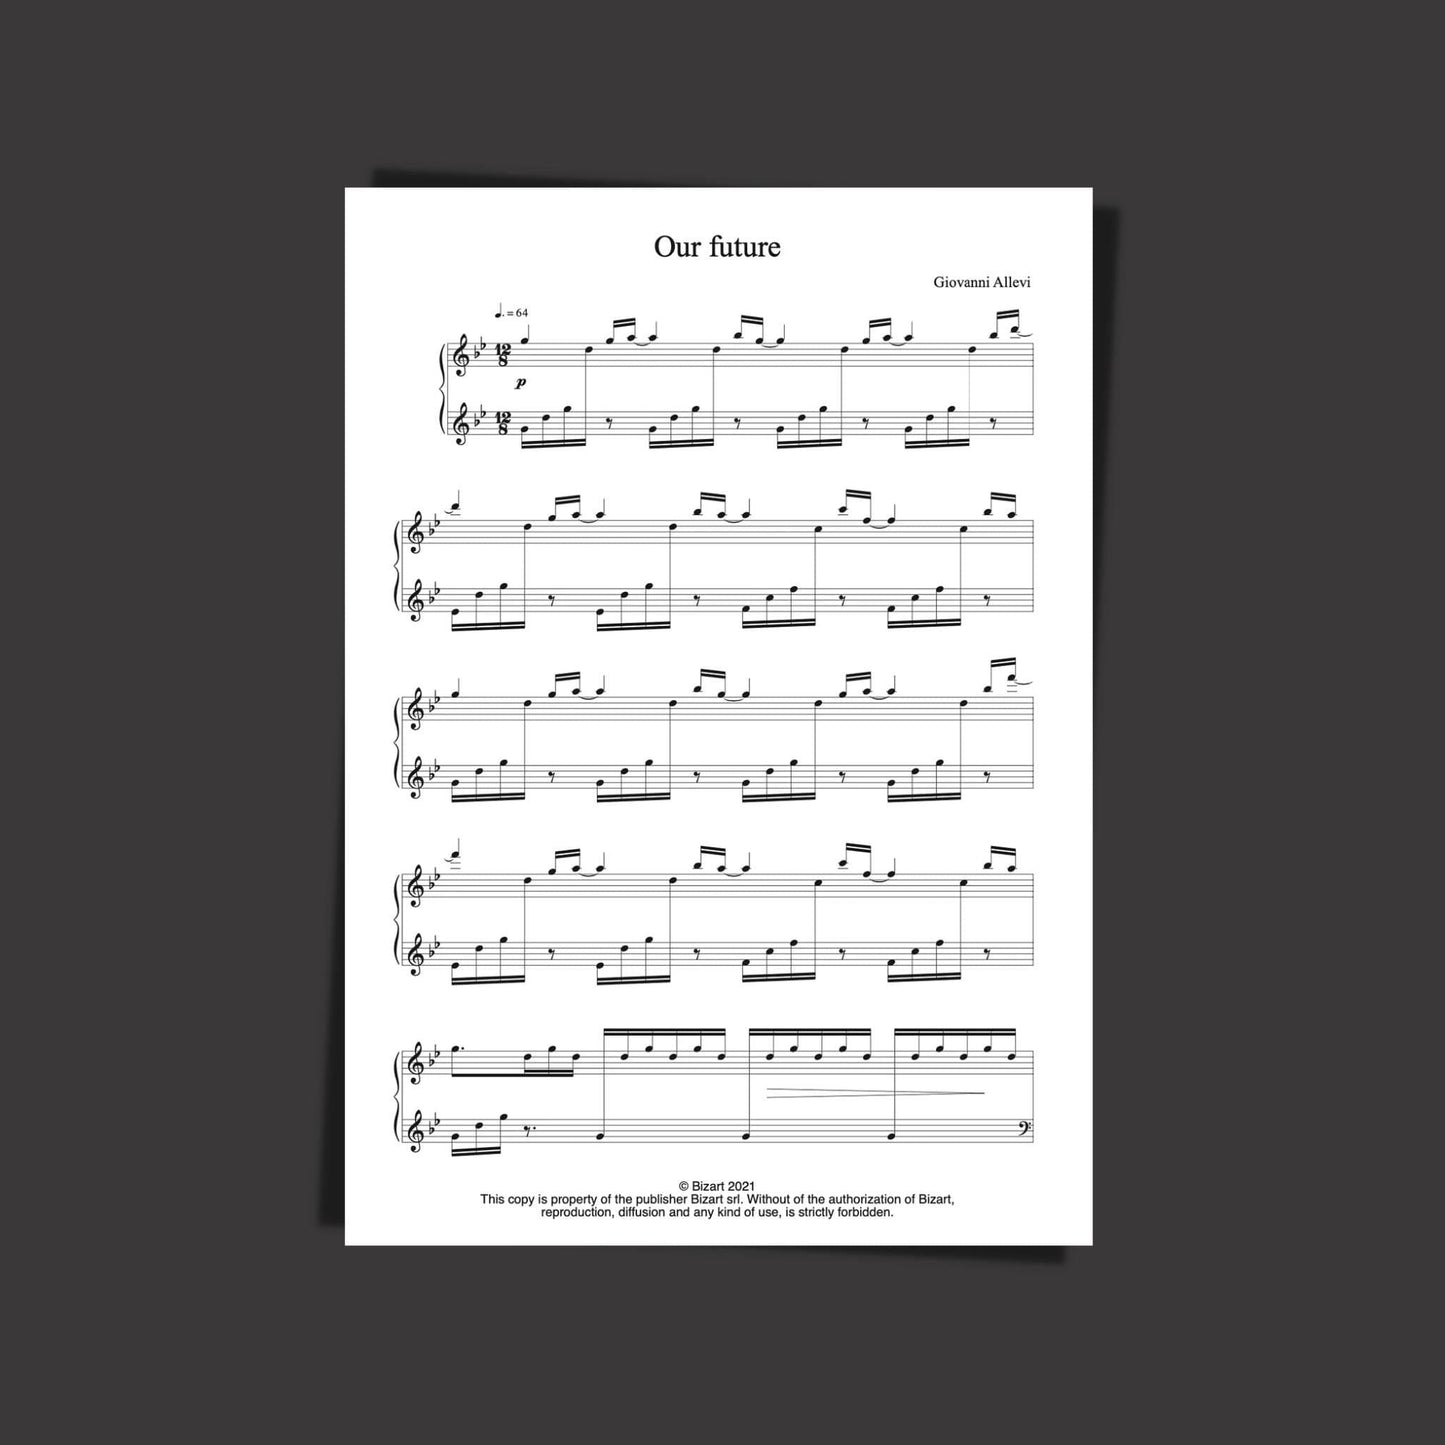 OUR FUTURE by composer and pianist GIOVANNI ALLEVI - digital sheet music opening